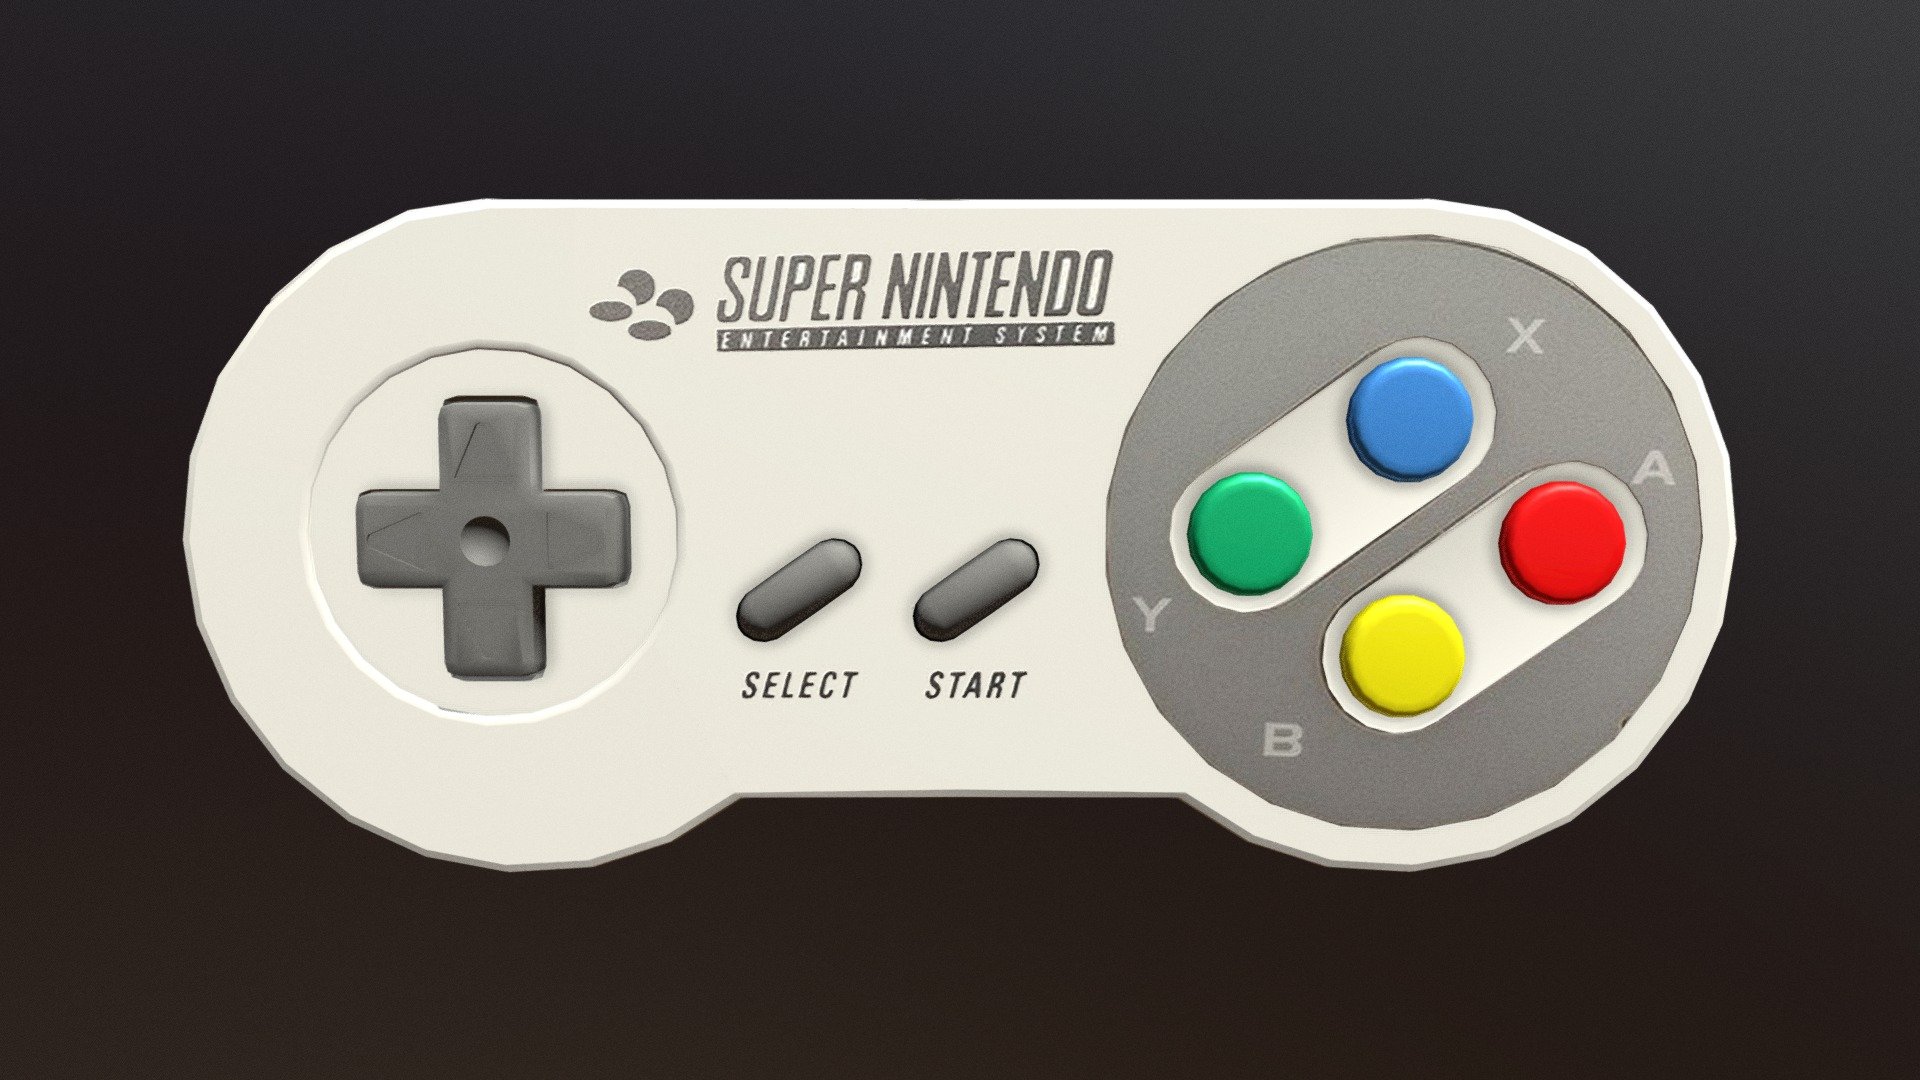 The Super Nintendo Entertainment System (officially abbreviated the Super NES[b] or SNES[c], and colloquially shortened to Super Nintendo[d]) is a 16-bit home video game console developed by Nintendo that was released in 1990 in Japan and South Korea, 1991 in North America, 1992 in Europe and Australasia (Oceania), and 1993 in South America. In Japan, the system is called the Super Famicom[e], or SFC for short. In South Korea, it is known as the Super Comboy[f] and was distributed by Hyundai Electronics. The system was released in Brazil on August 30, 1993,[13] by Playtronic. Although each version is essentially the same, several forms of regional lockout prevent the different versions from being compatible with one another 3d model